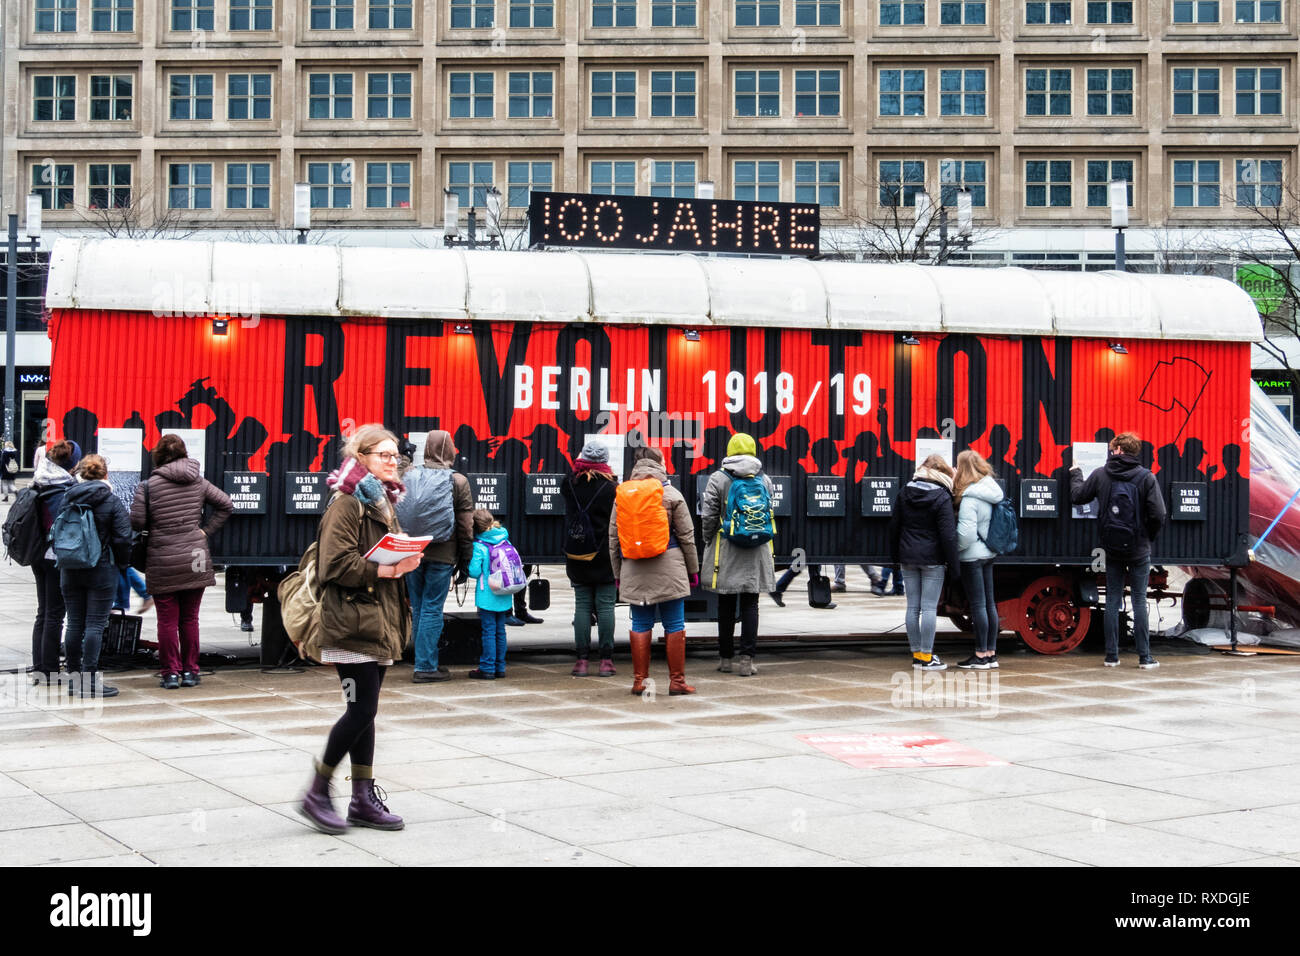 Berlin, Germany. 8th Mar 2019.  Exhibition celebrating 100 years of Revolution 1918-1919 using placards, information towers and a mobile furniture van to document historical events. During the November revolution furniture vans were used as barricades and a historic furniture van is a central element of this winter exhibition theme that documents the event. November 2018 marked the 100th anniversary of the end of the First World War and the November Revolution. Credit: Eden Breitz/Alamy Live News Stock Photo